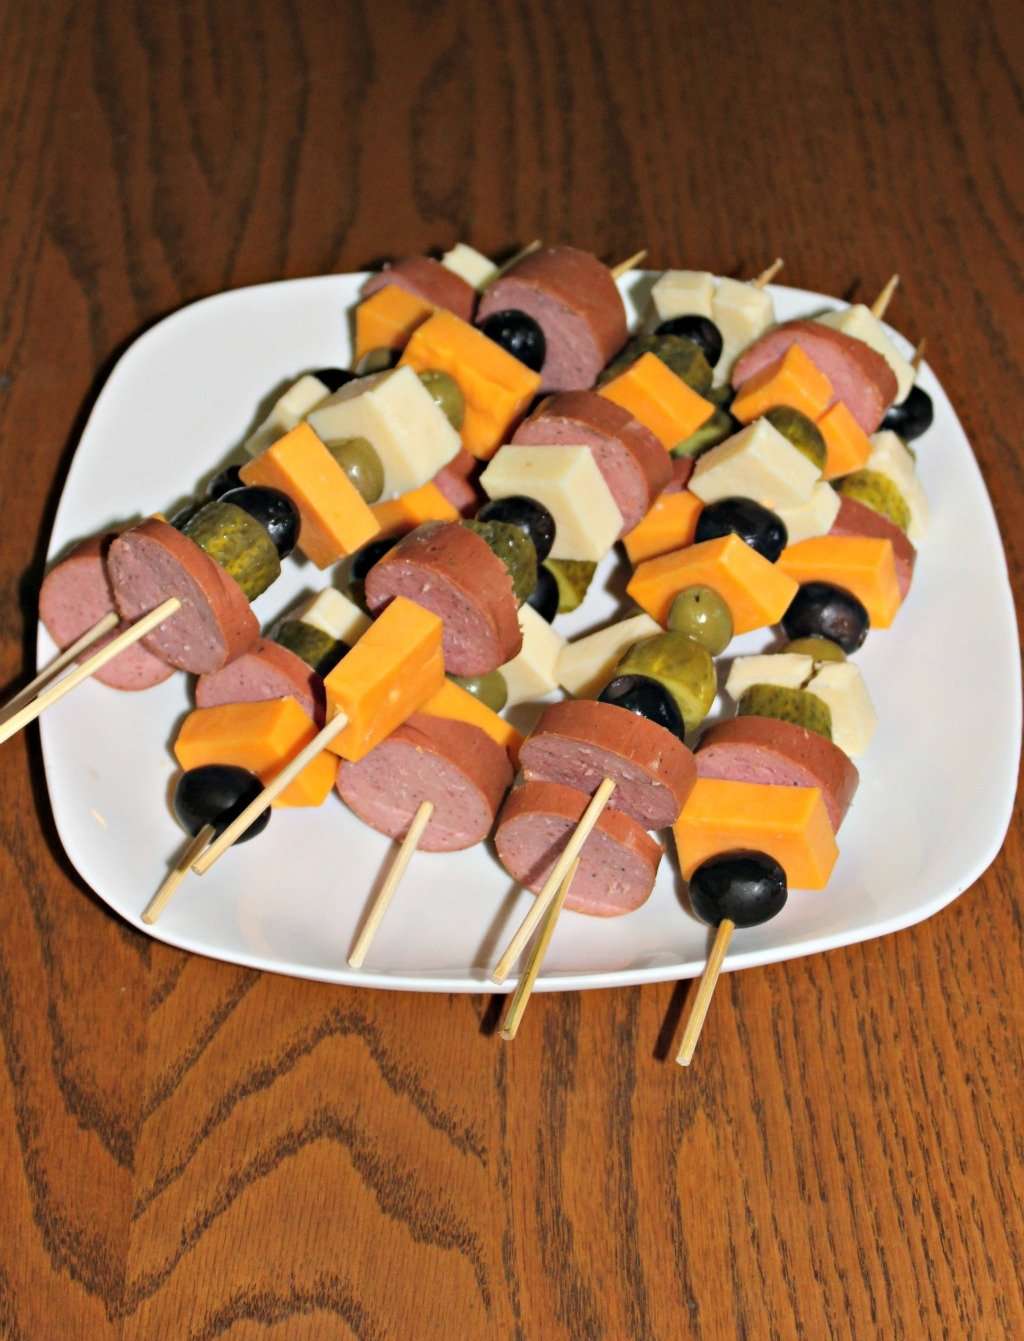 Broccoli Salad and Kabobs with Heluva Good! Cheese: A Perfect Summer Meal